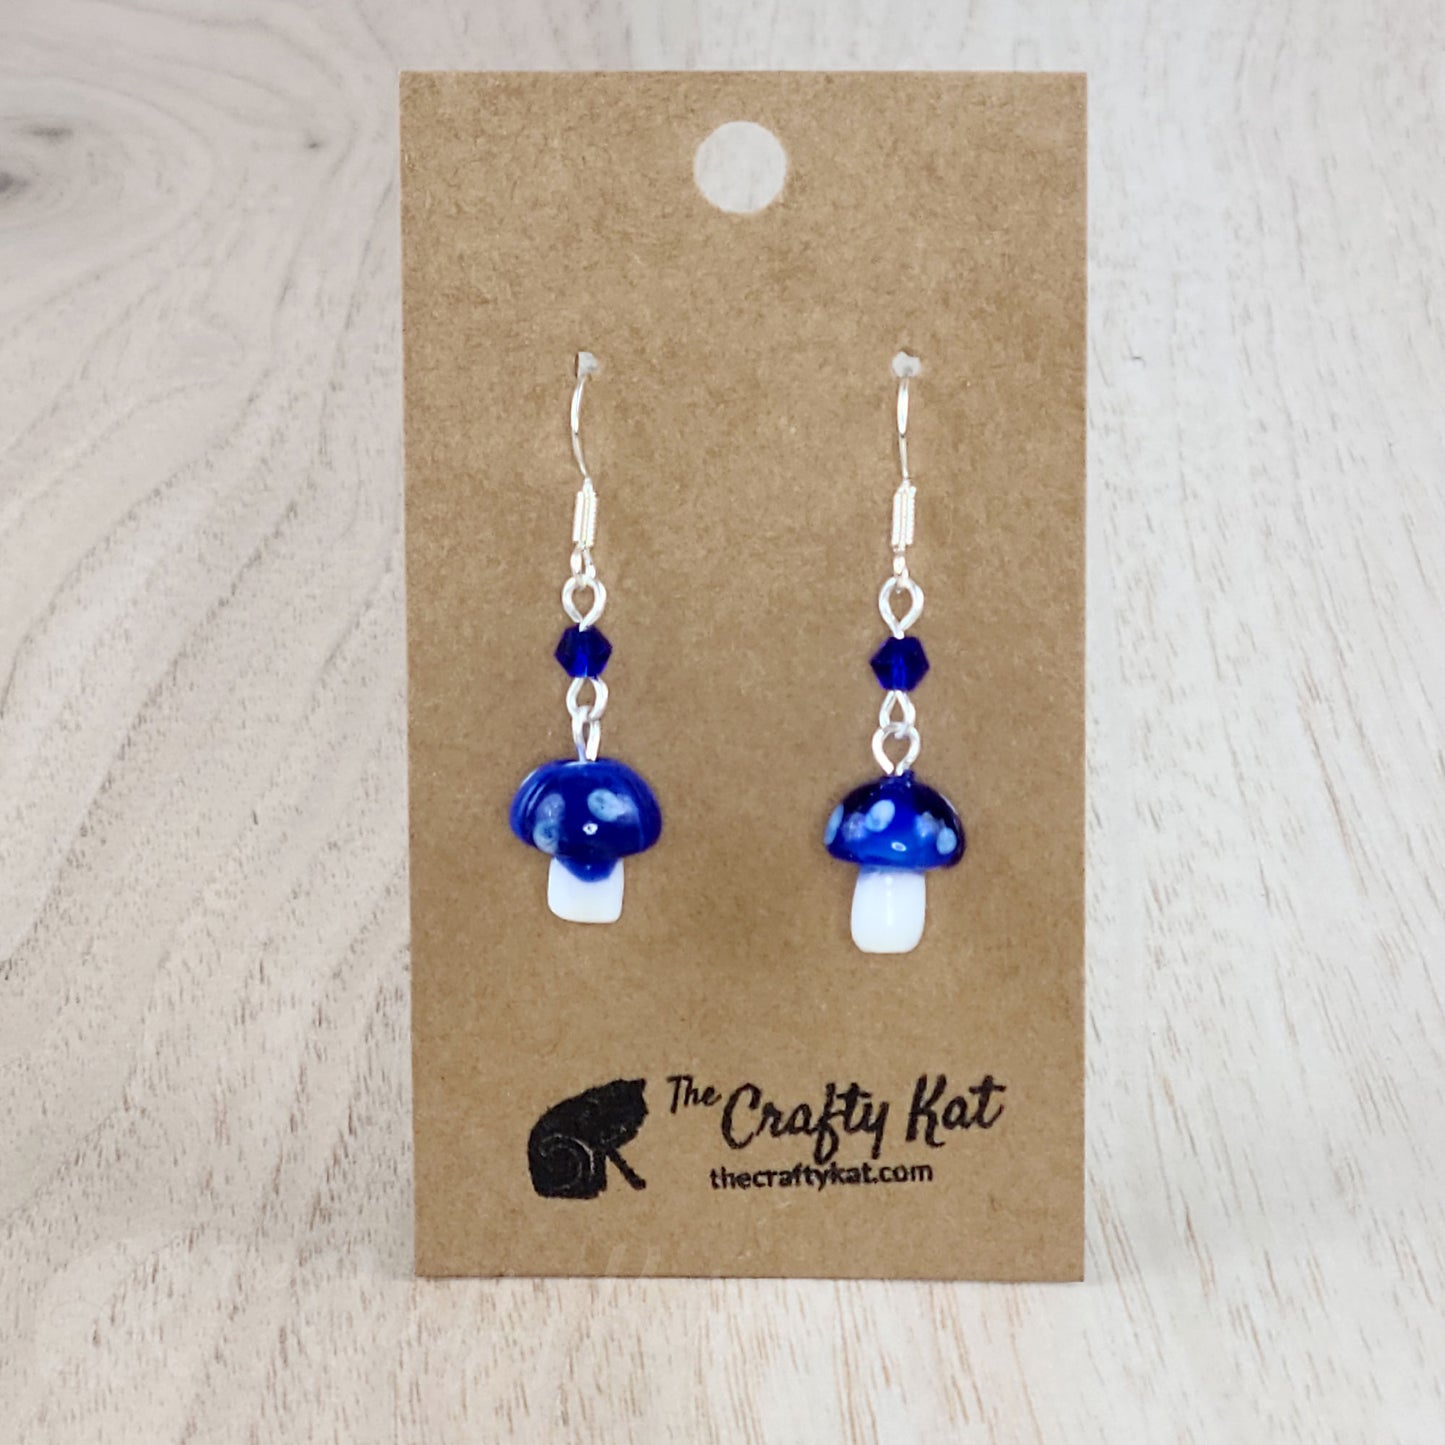 Mushroom-shaped tiered earrings made of lampwork and pressed glass beads with silver-plated base metal fittings. These mushrooms are dark blue with white spots.